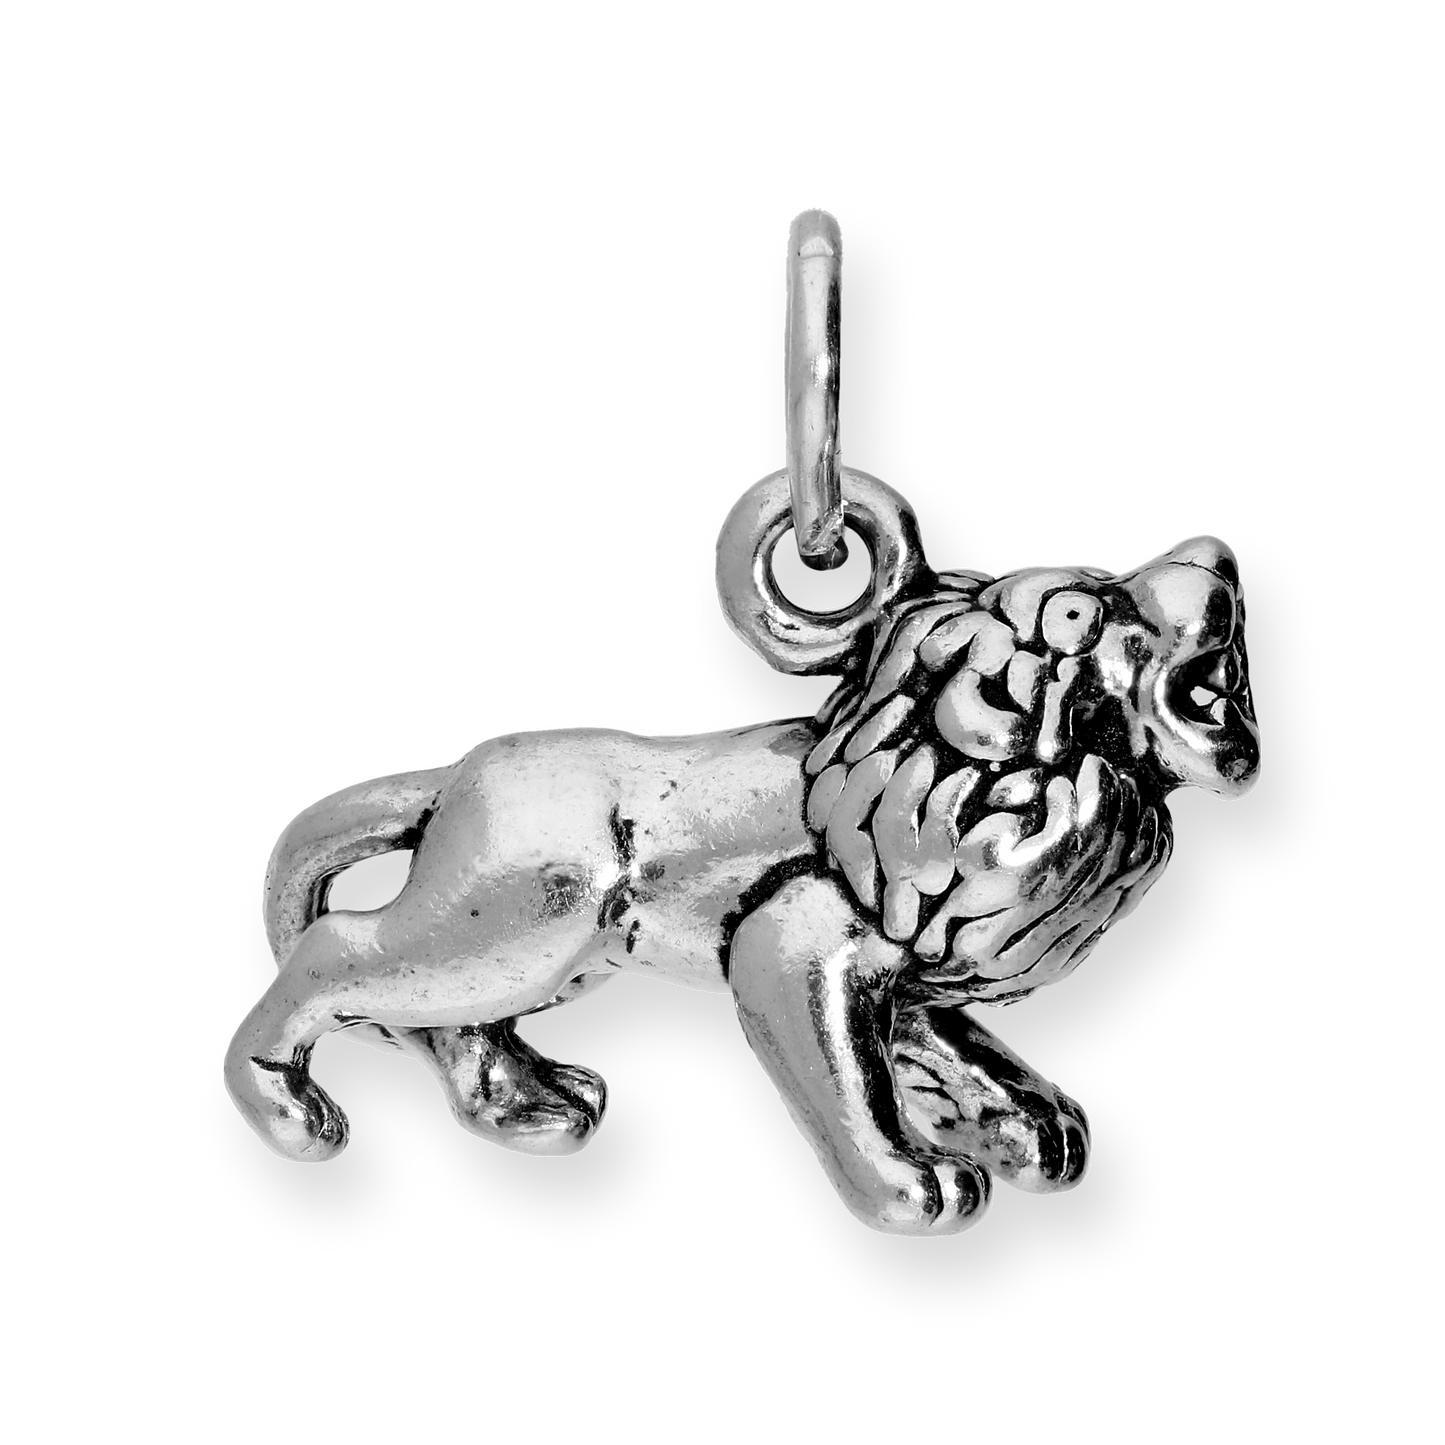 Sterling Silver Roaring Lion Charm